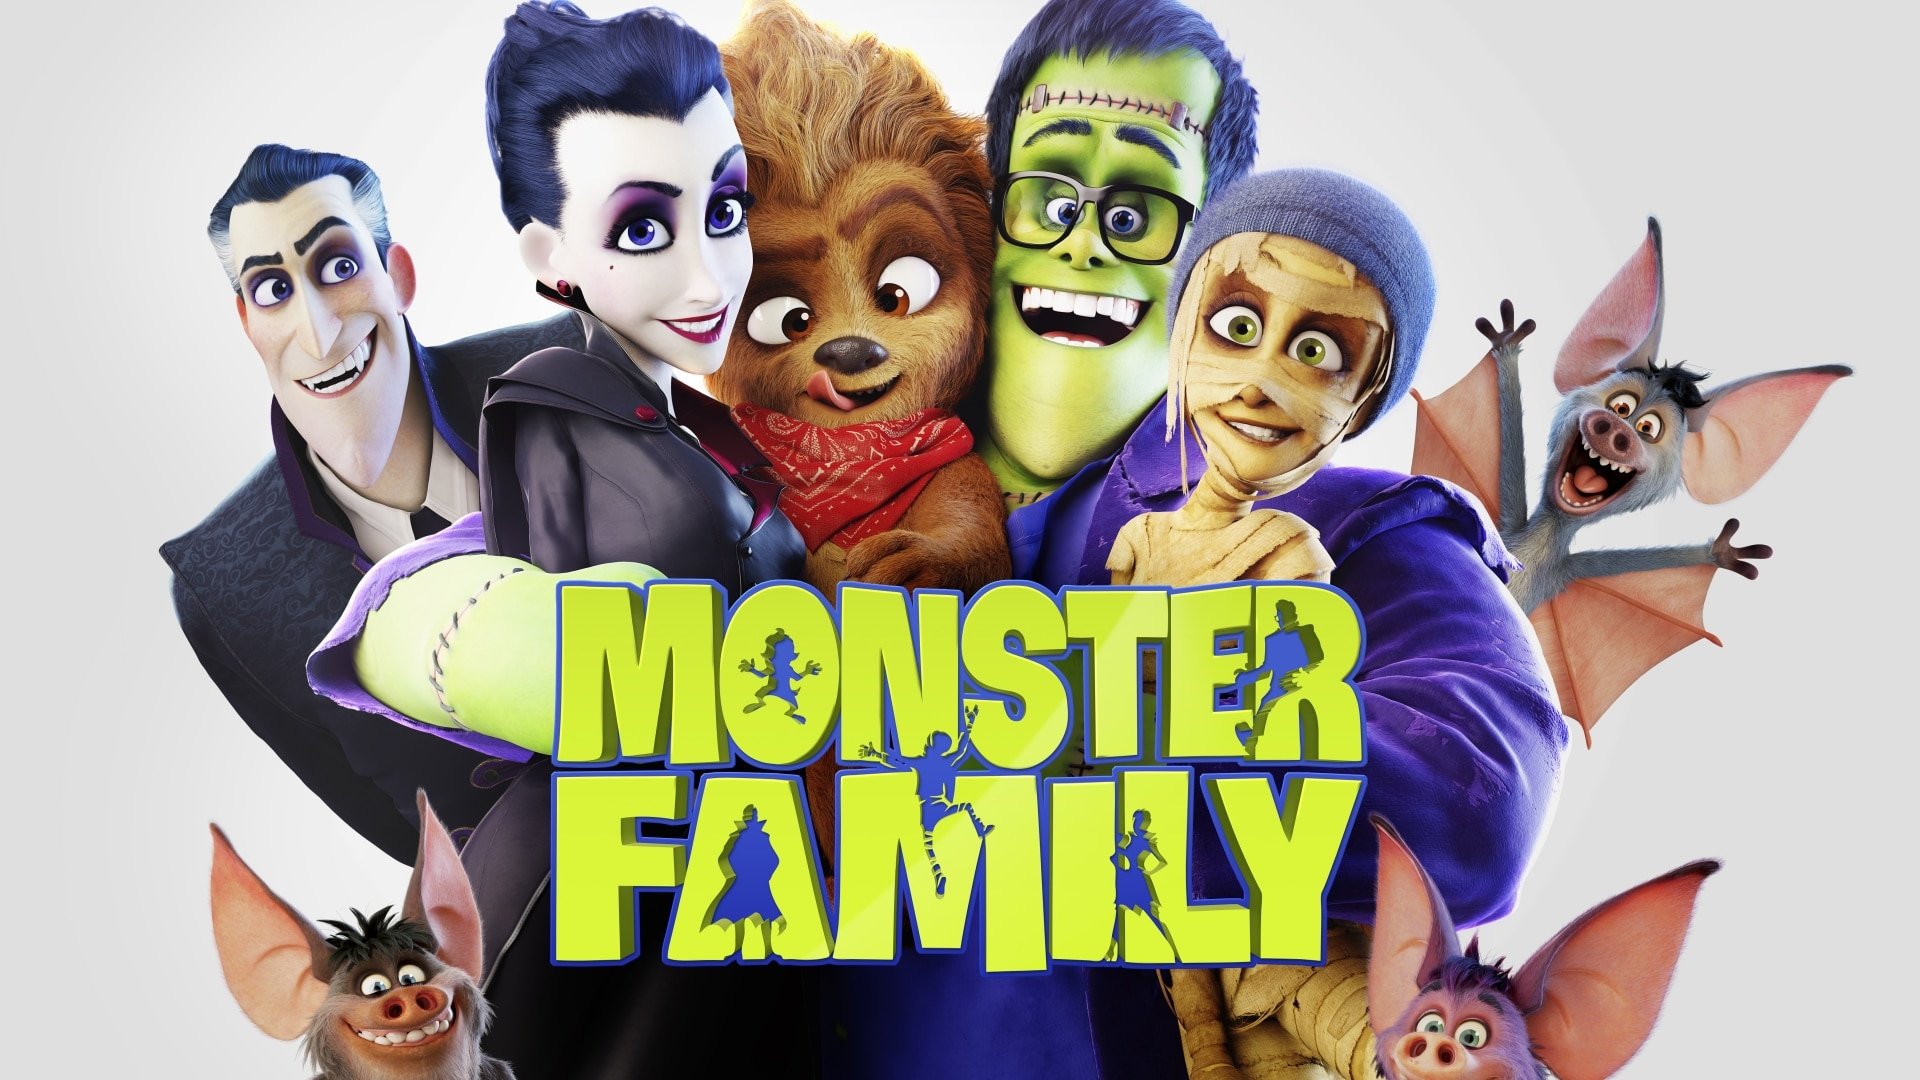 MONSTER FAMILY  Vampires, Witches & Monsters in new trailer for